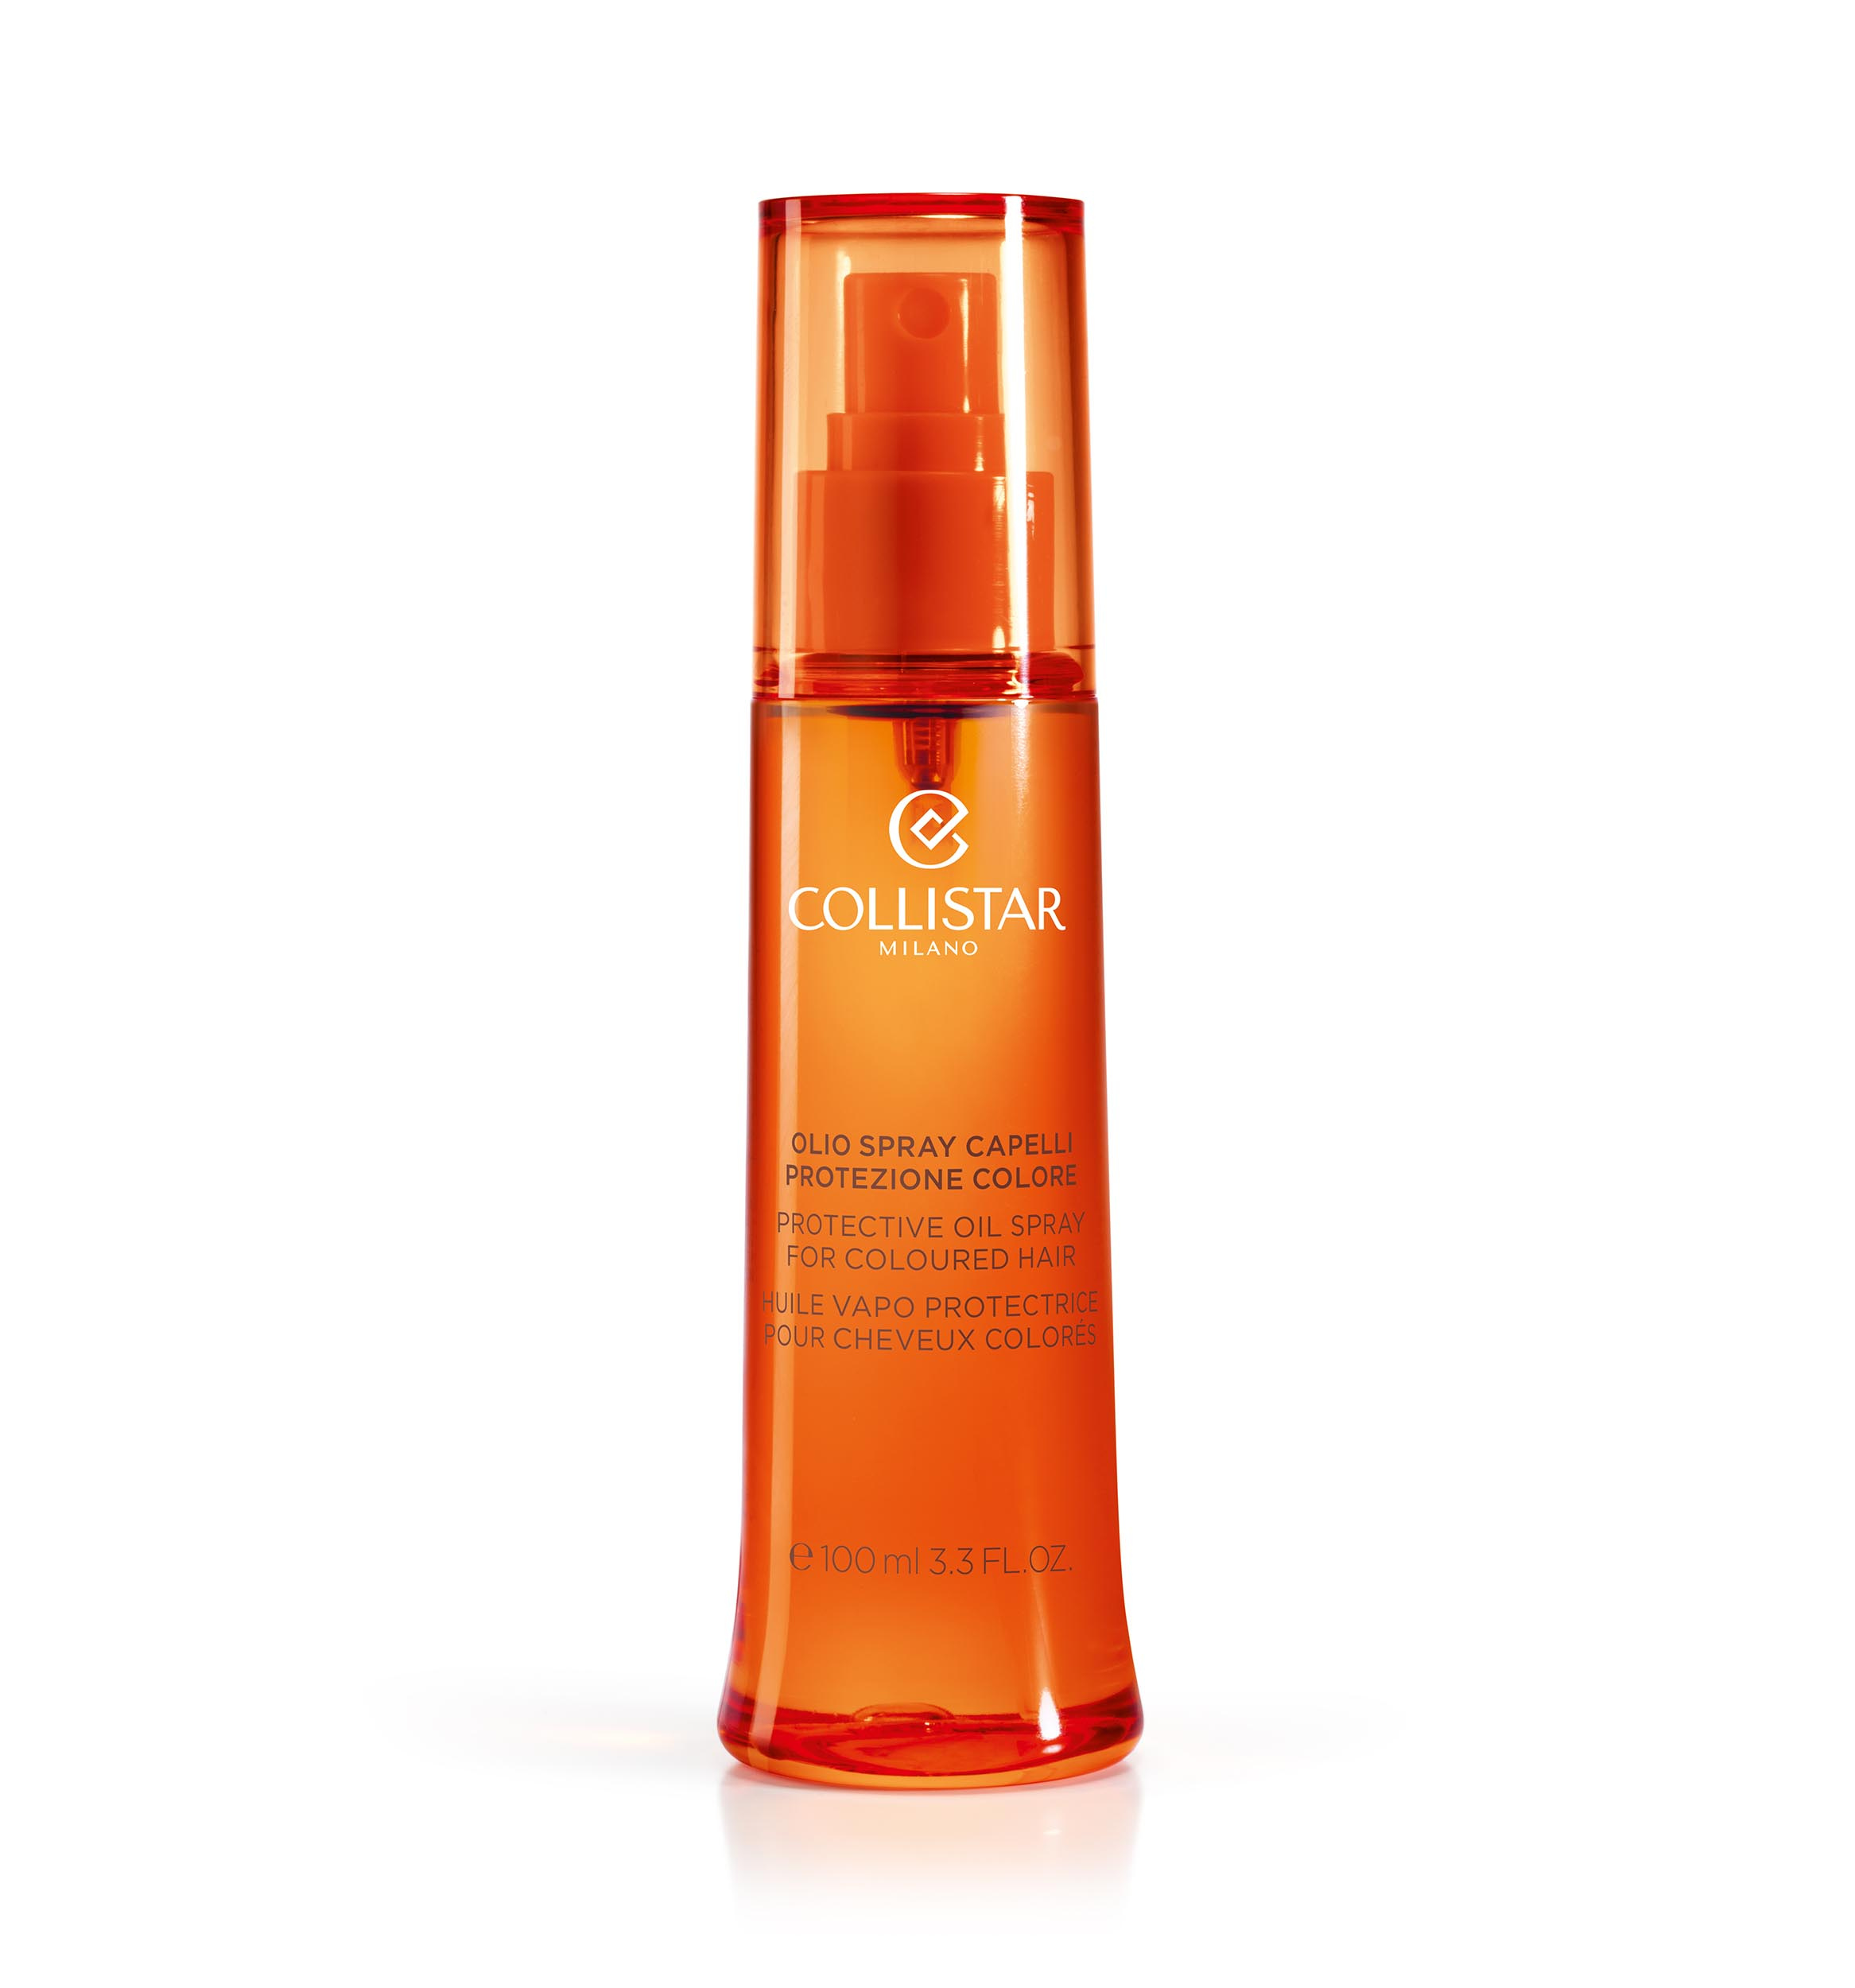 PROTECTIVE OIL SPRAY FOR COLOURED HAIR by Collistar | Shop Online